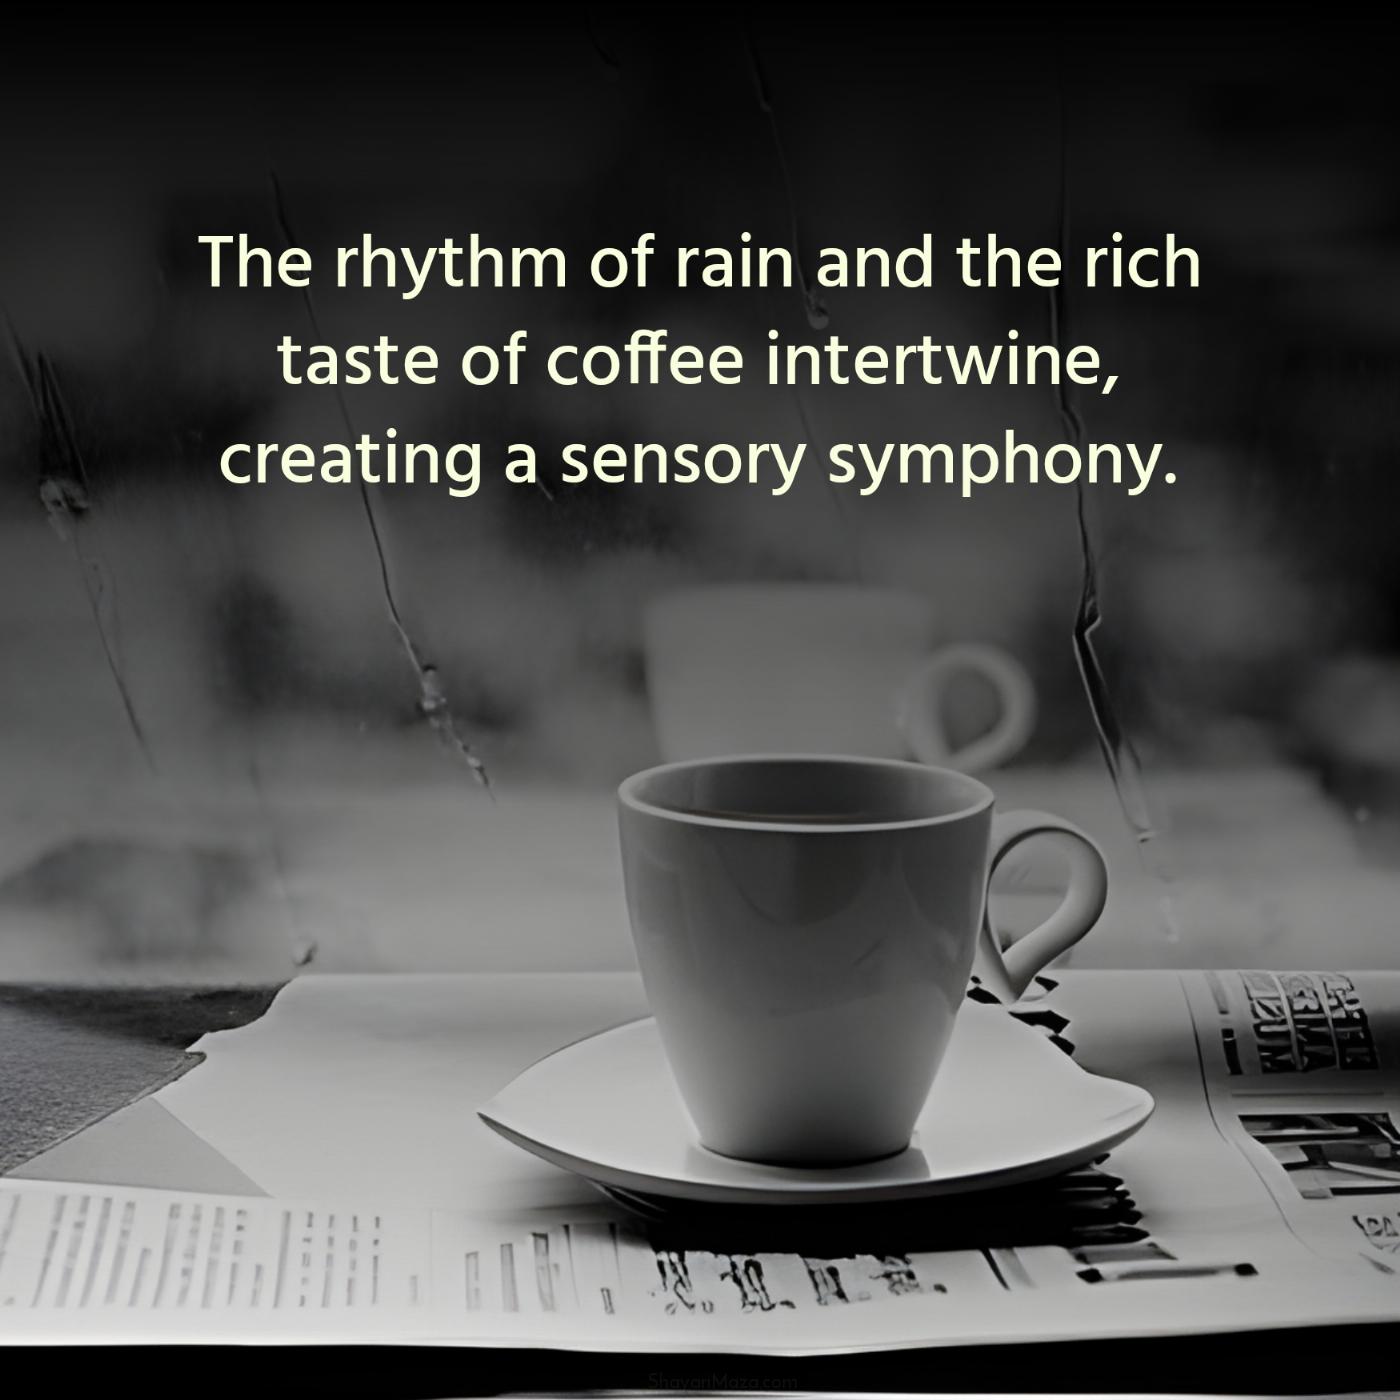 The rhythm of rain and the rich taste of coffee intertwine